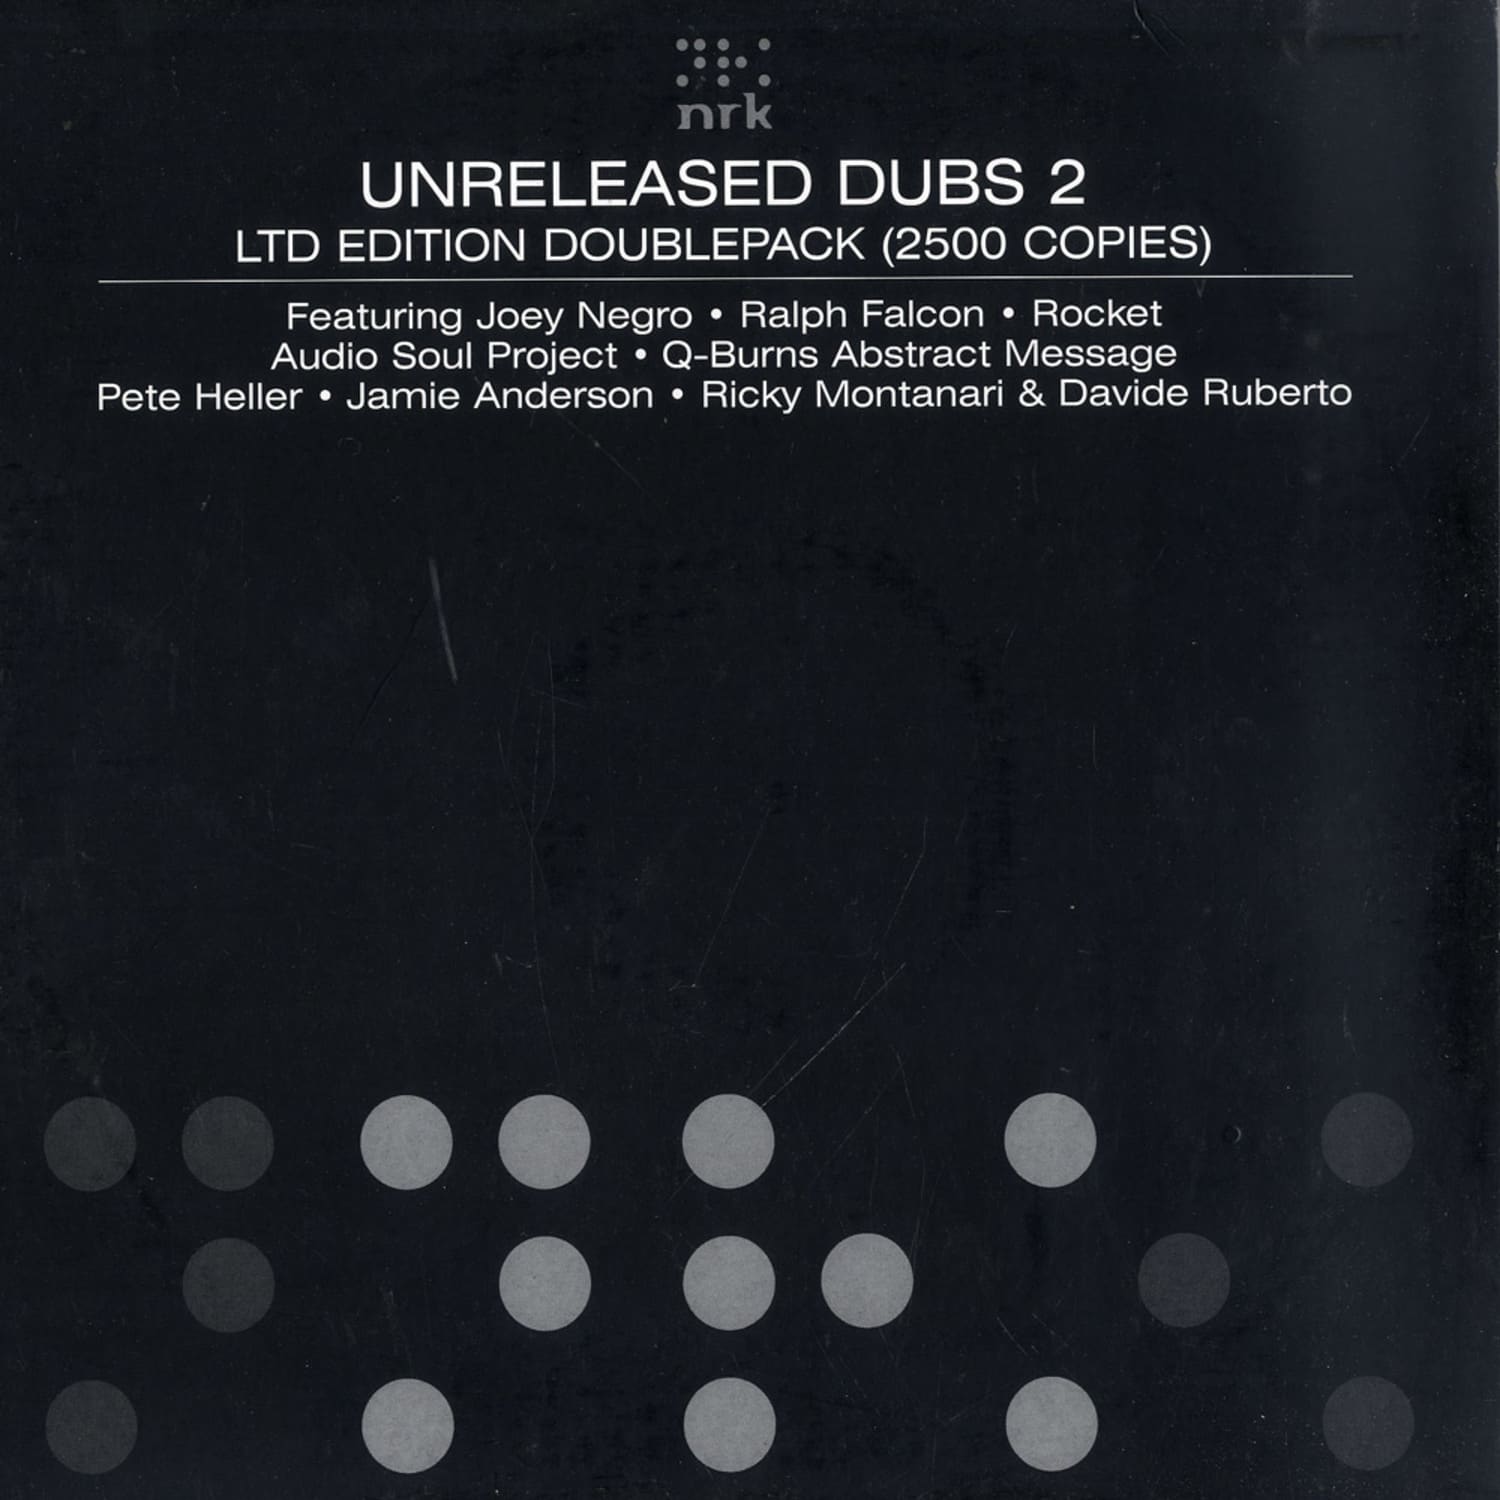 V/A - Unreleased Dubs 2 